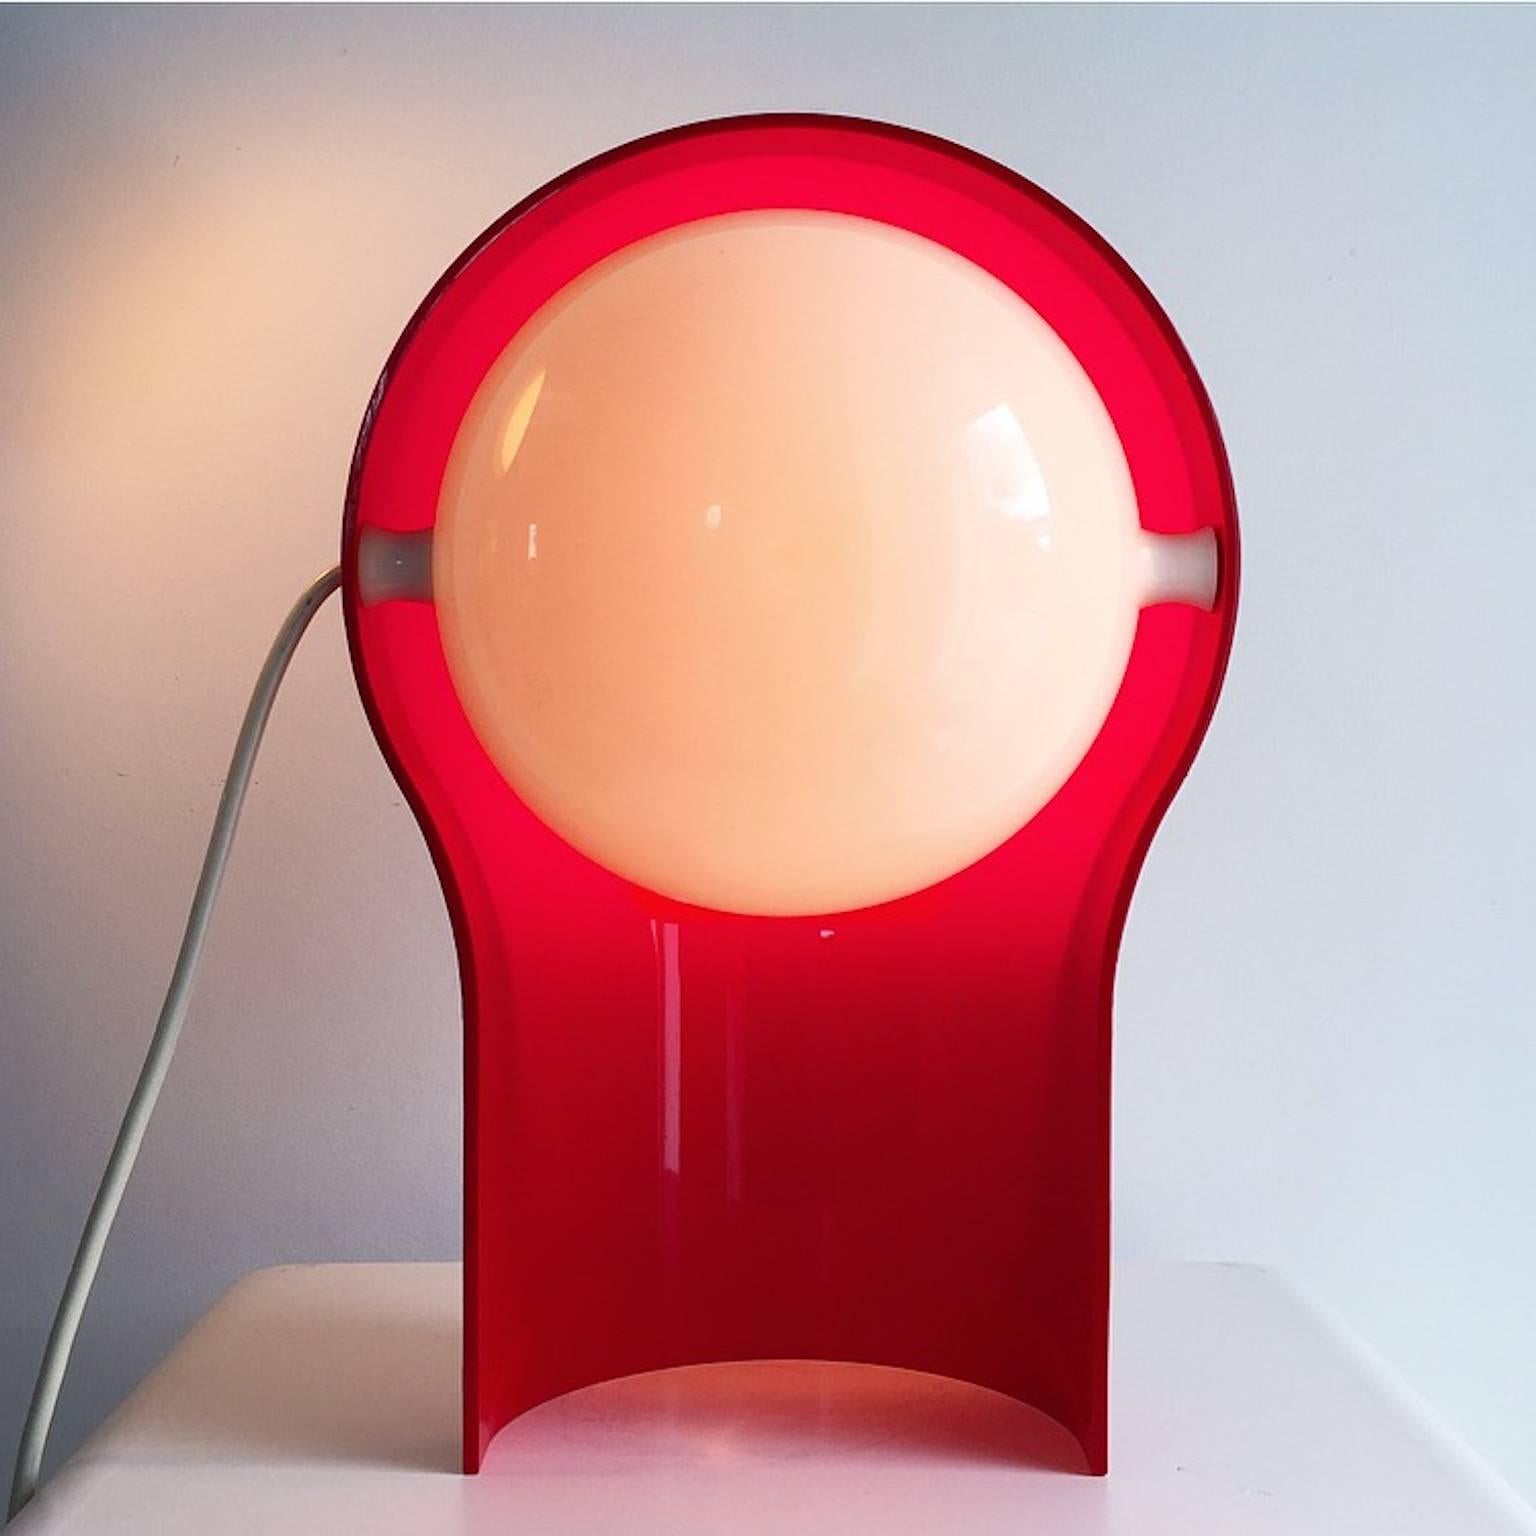 All original Telegono table lamp designed in 1968 by world known designer and architect Vico Magistretti for Artemide, Italy.

Beautiful iconic Italian design in fully red and white plastic. The white hemispherical inner shade can be